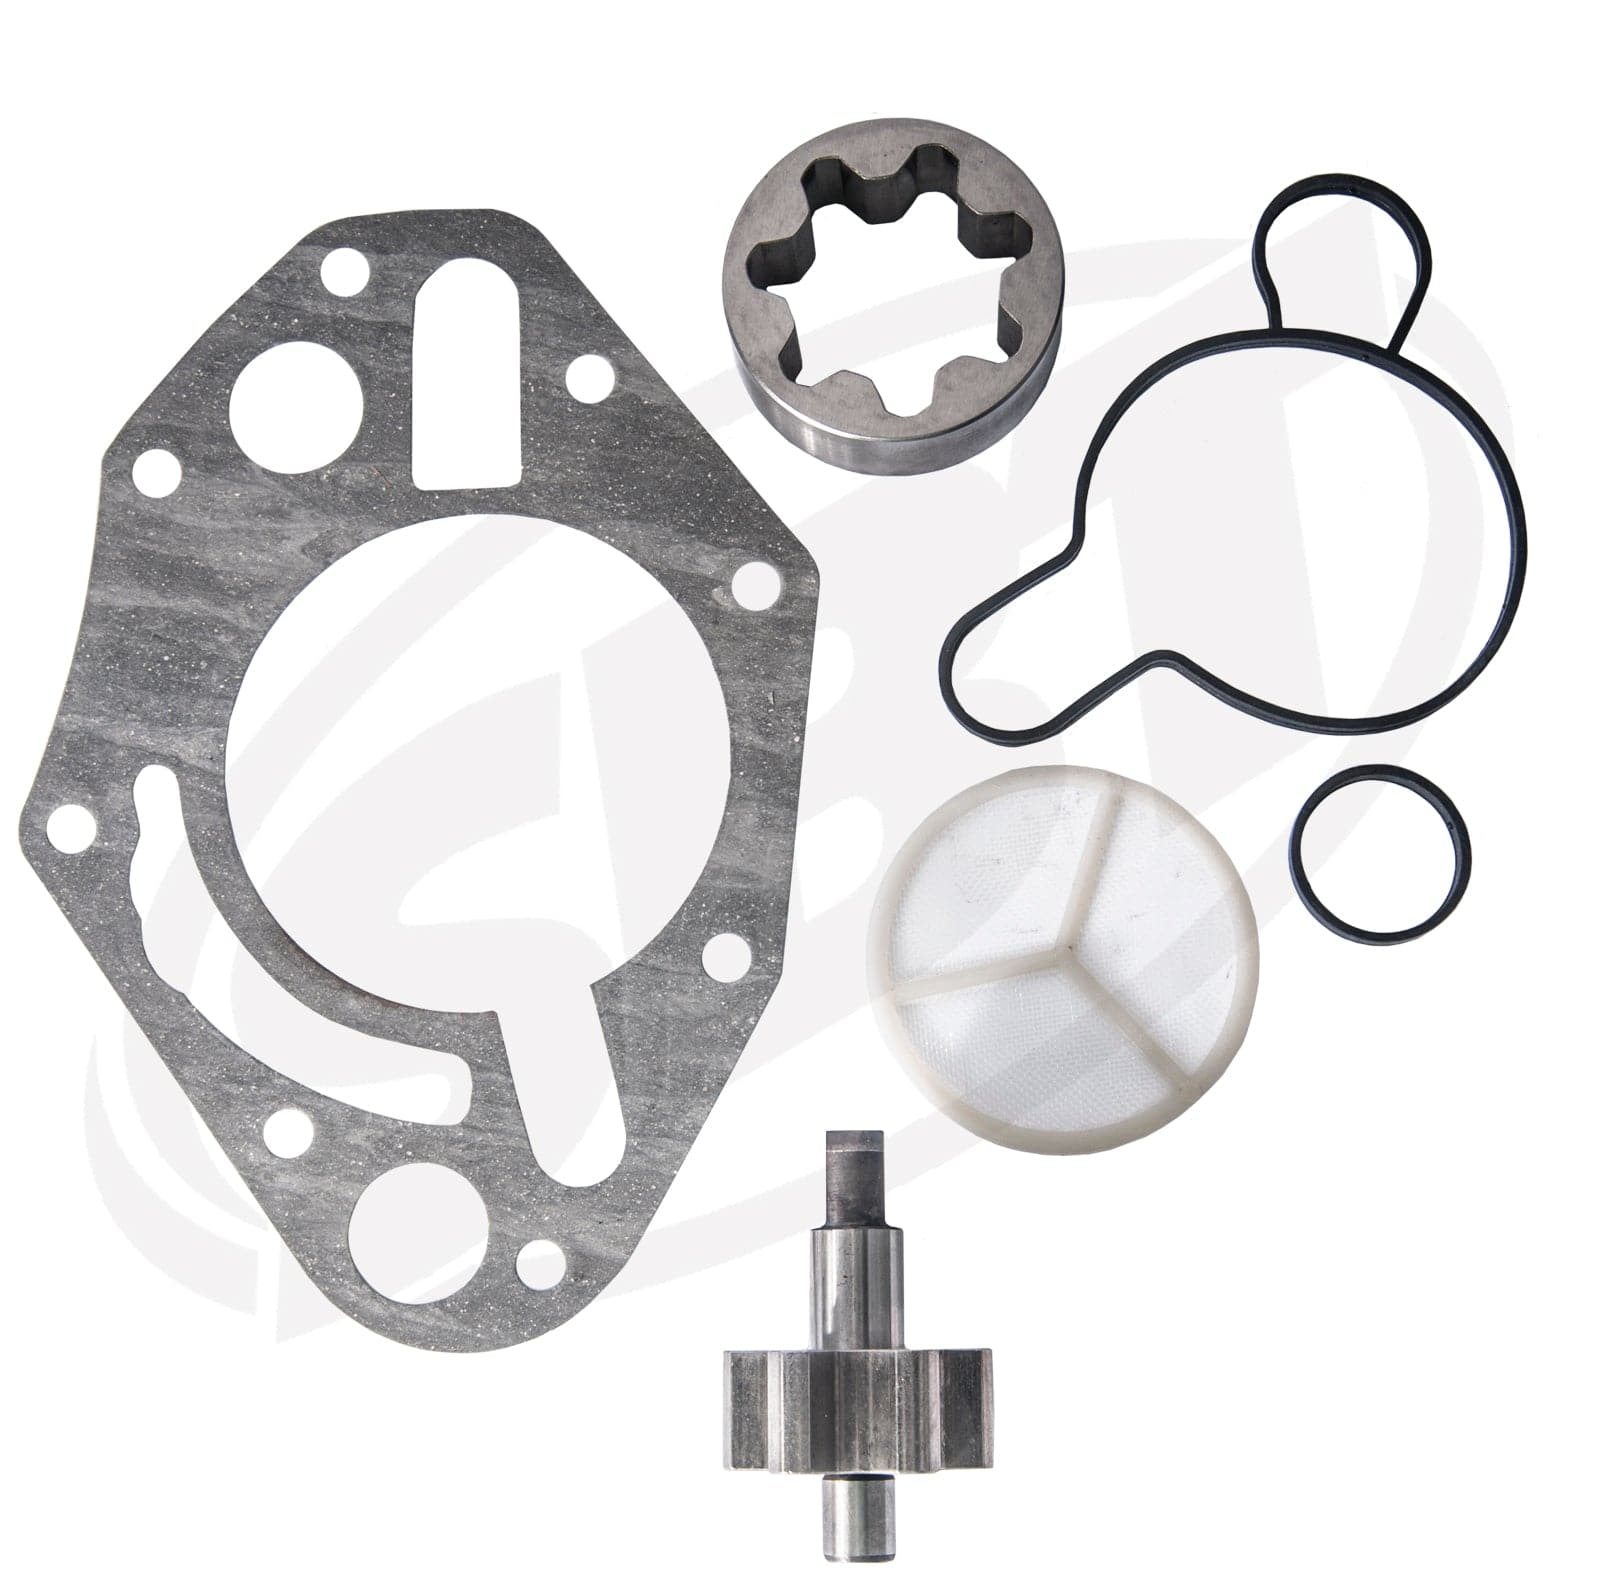 Secondary Oil Pump Kit (Front) for Sea-Doo All Four Strokes (except RXP) 2002 2003